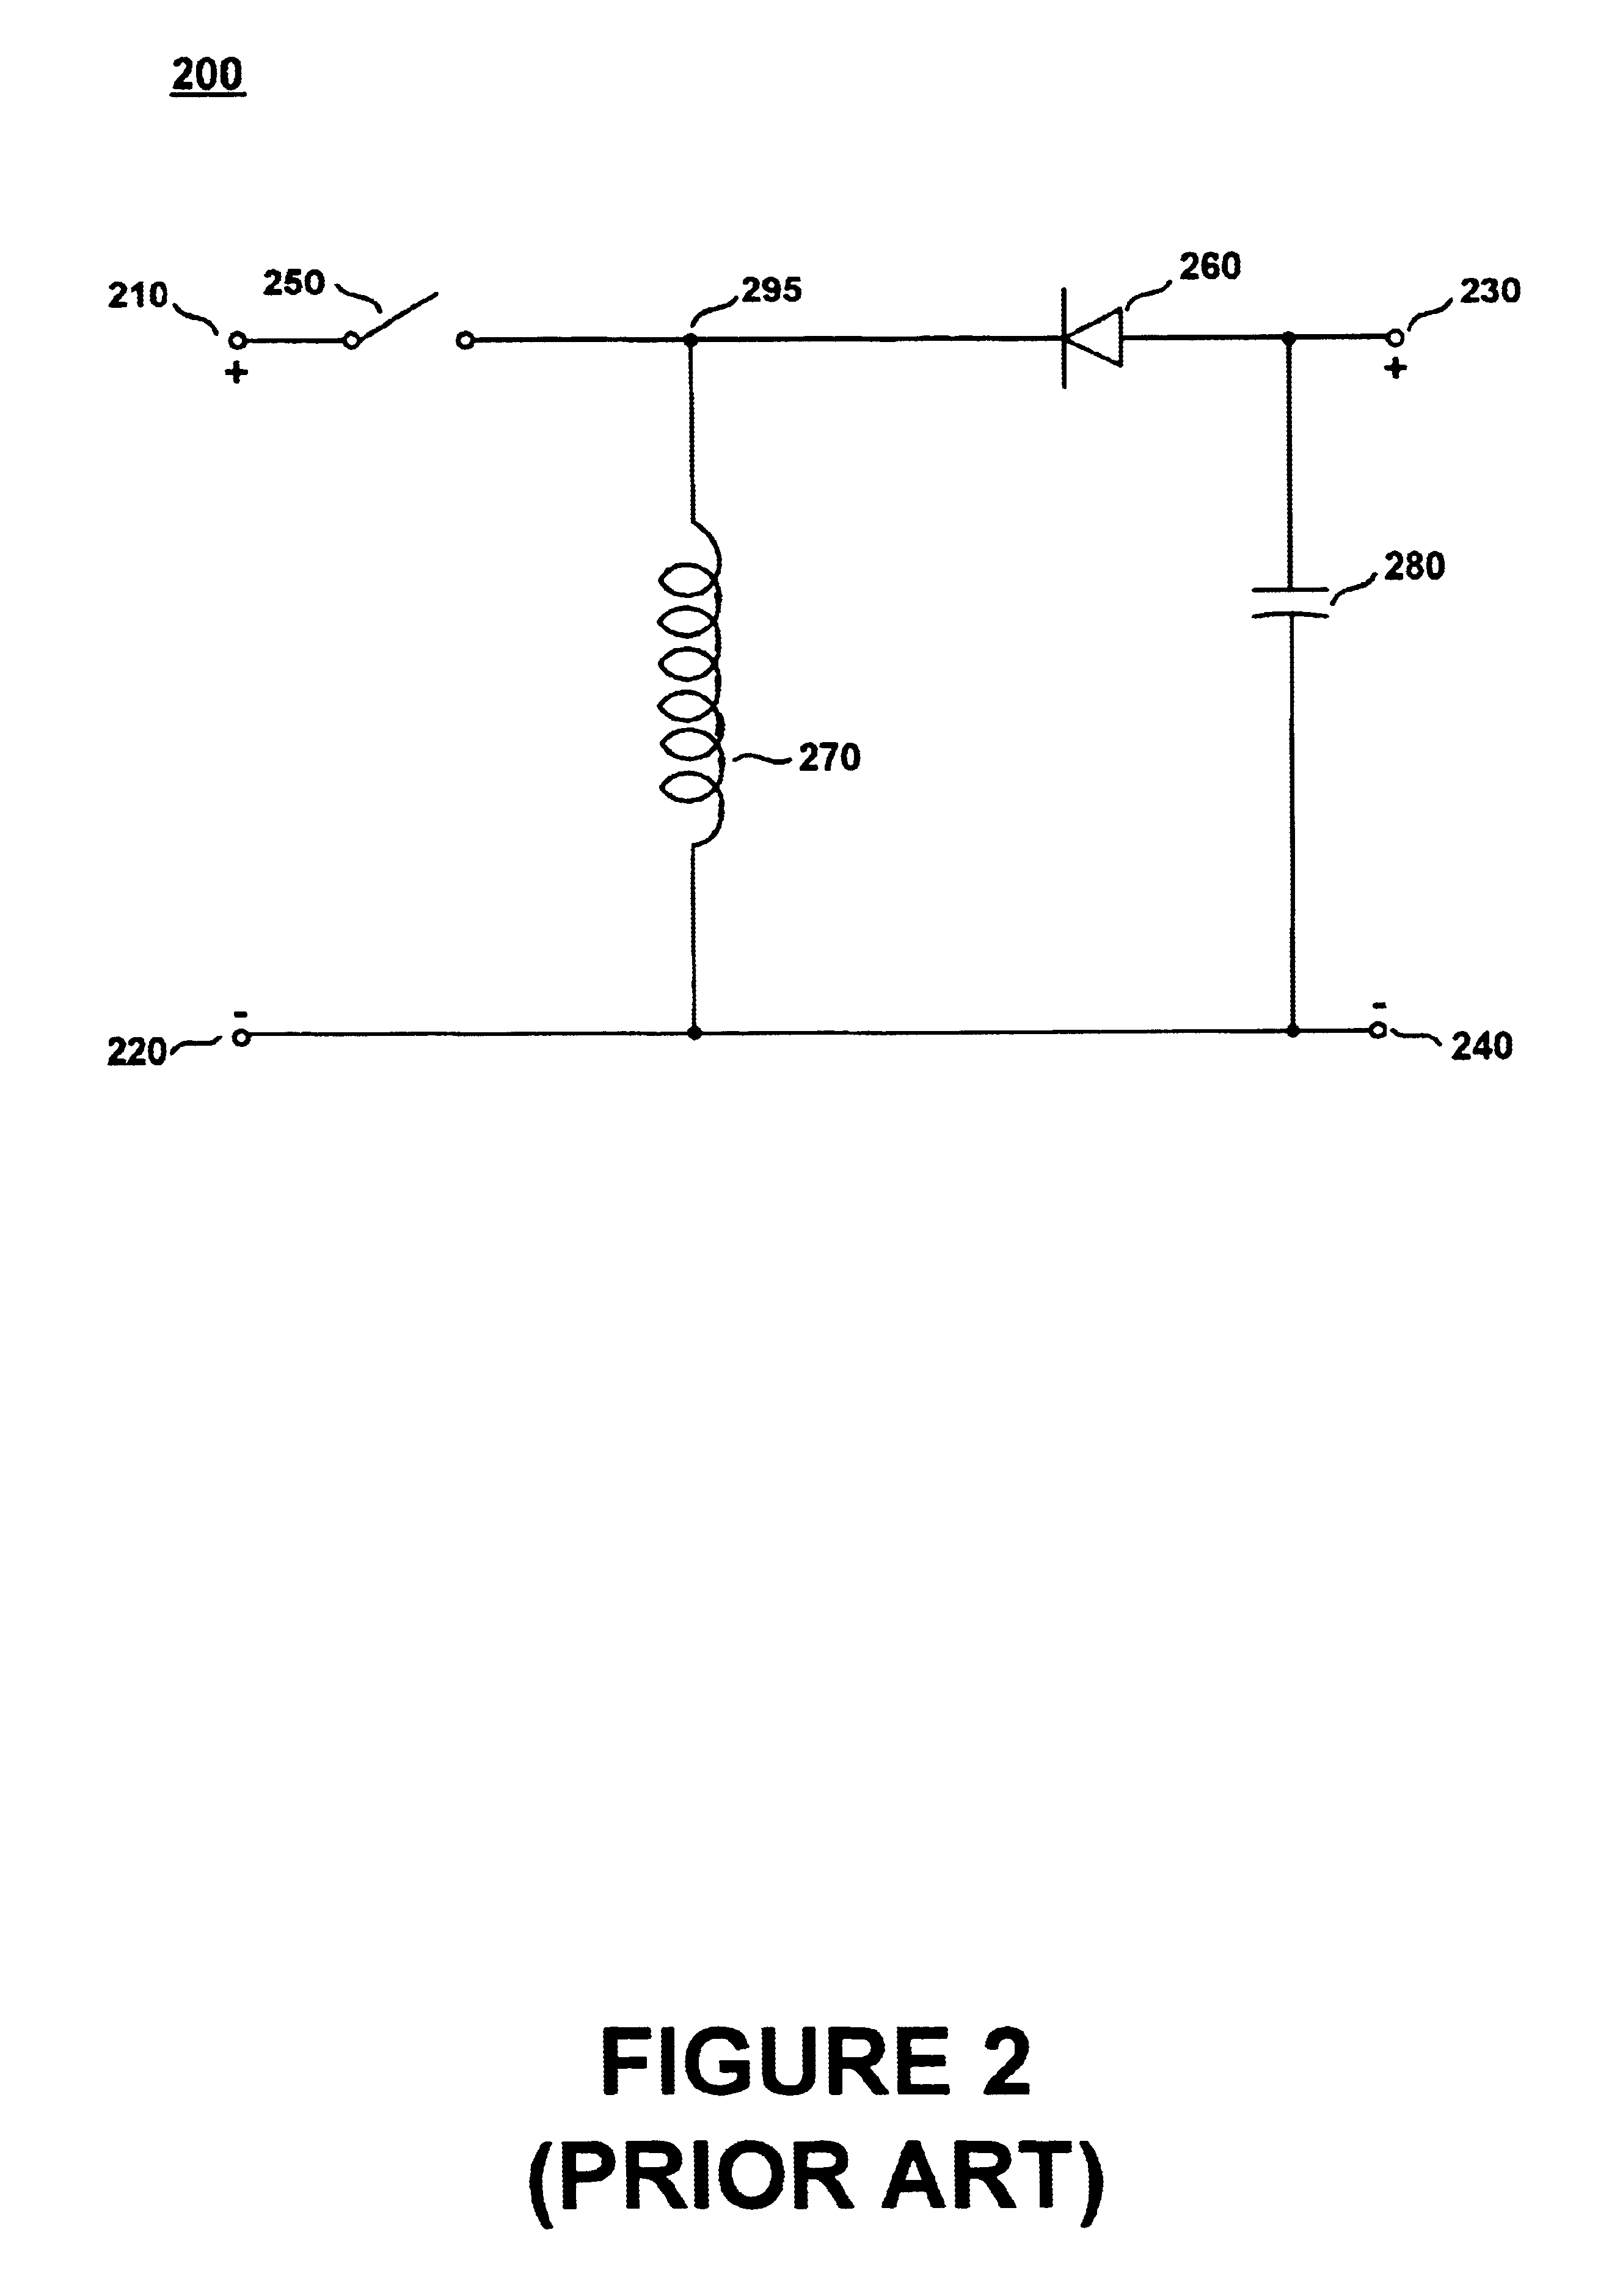 Buck-boost circuit with normally off JFET